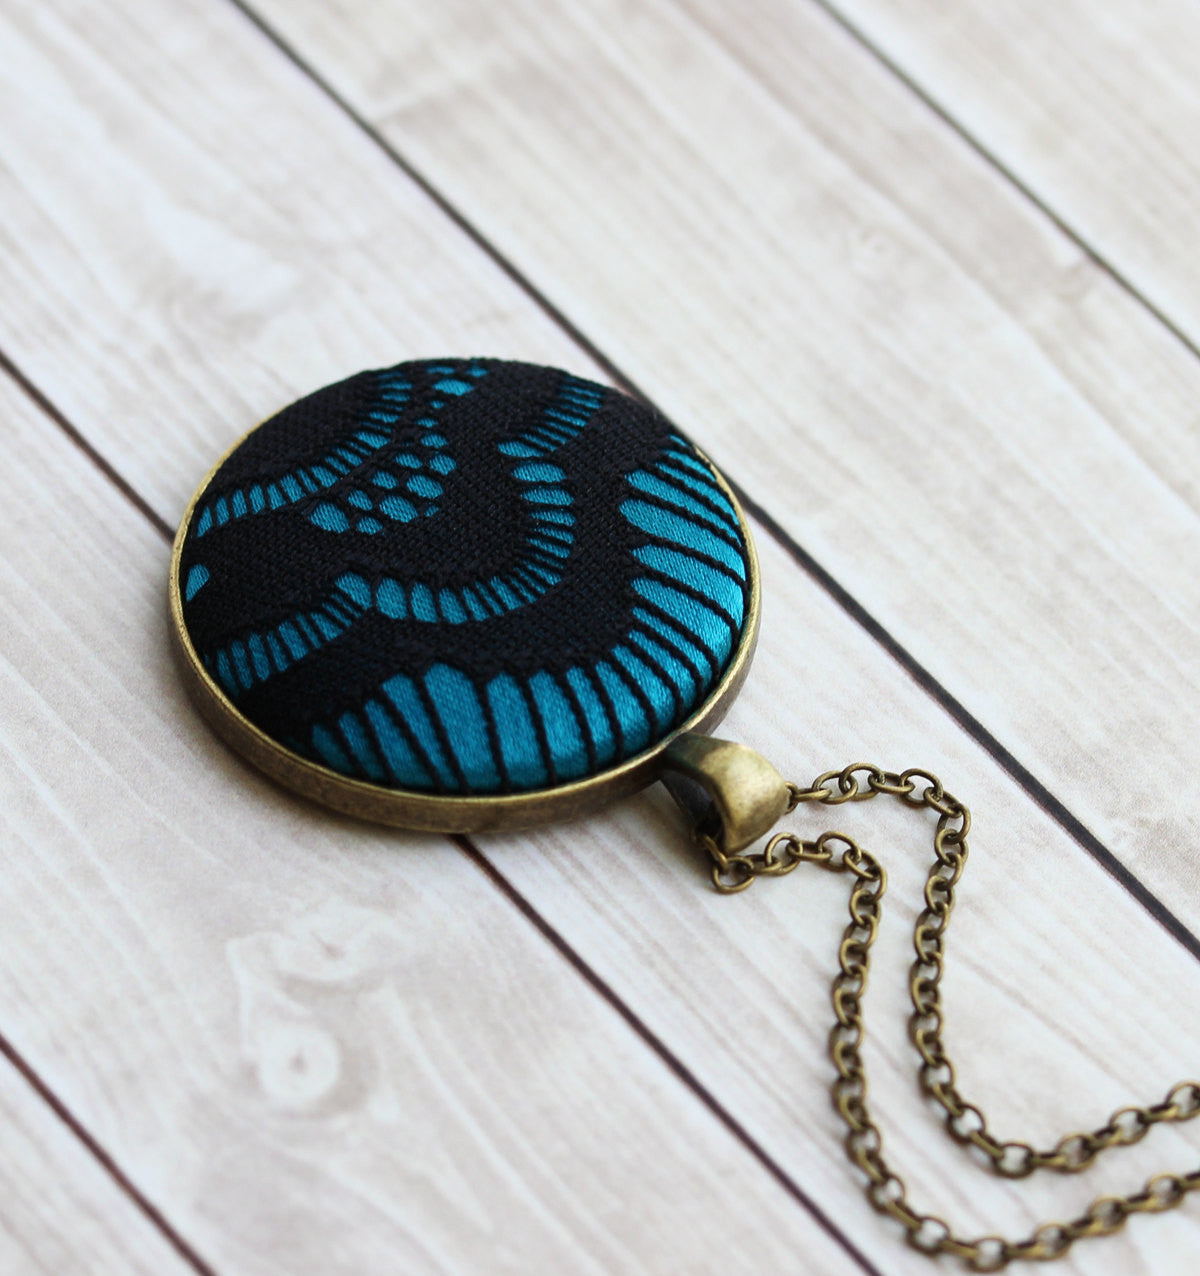 Black and Teal Necklace, Large Lace Pendant